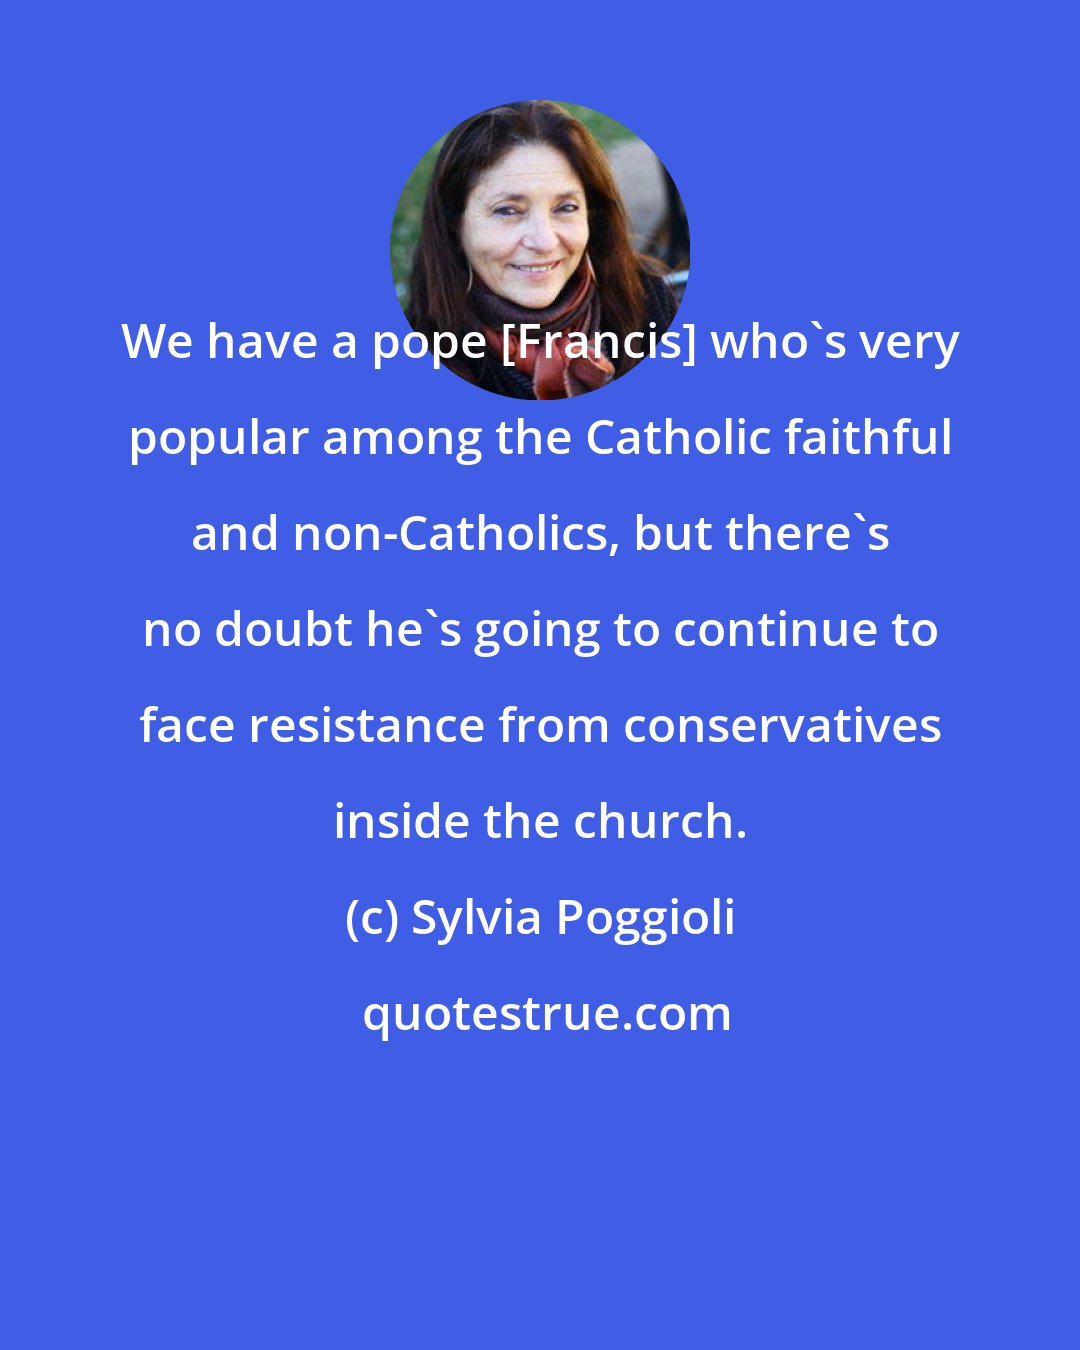 Sylvia Poggioli: We have a pope [Francis] who's very popular among the Catholic faithful and non-Catholics, but there's no doubt he's going to continue to face resistance from conservatives inside the church.